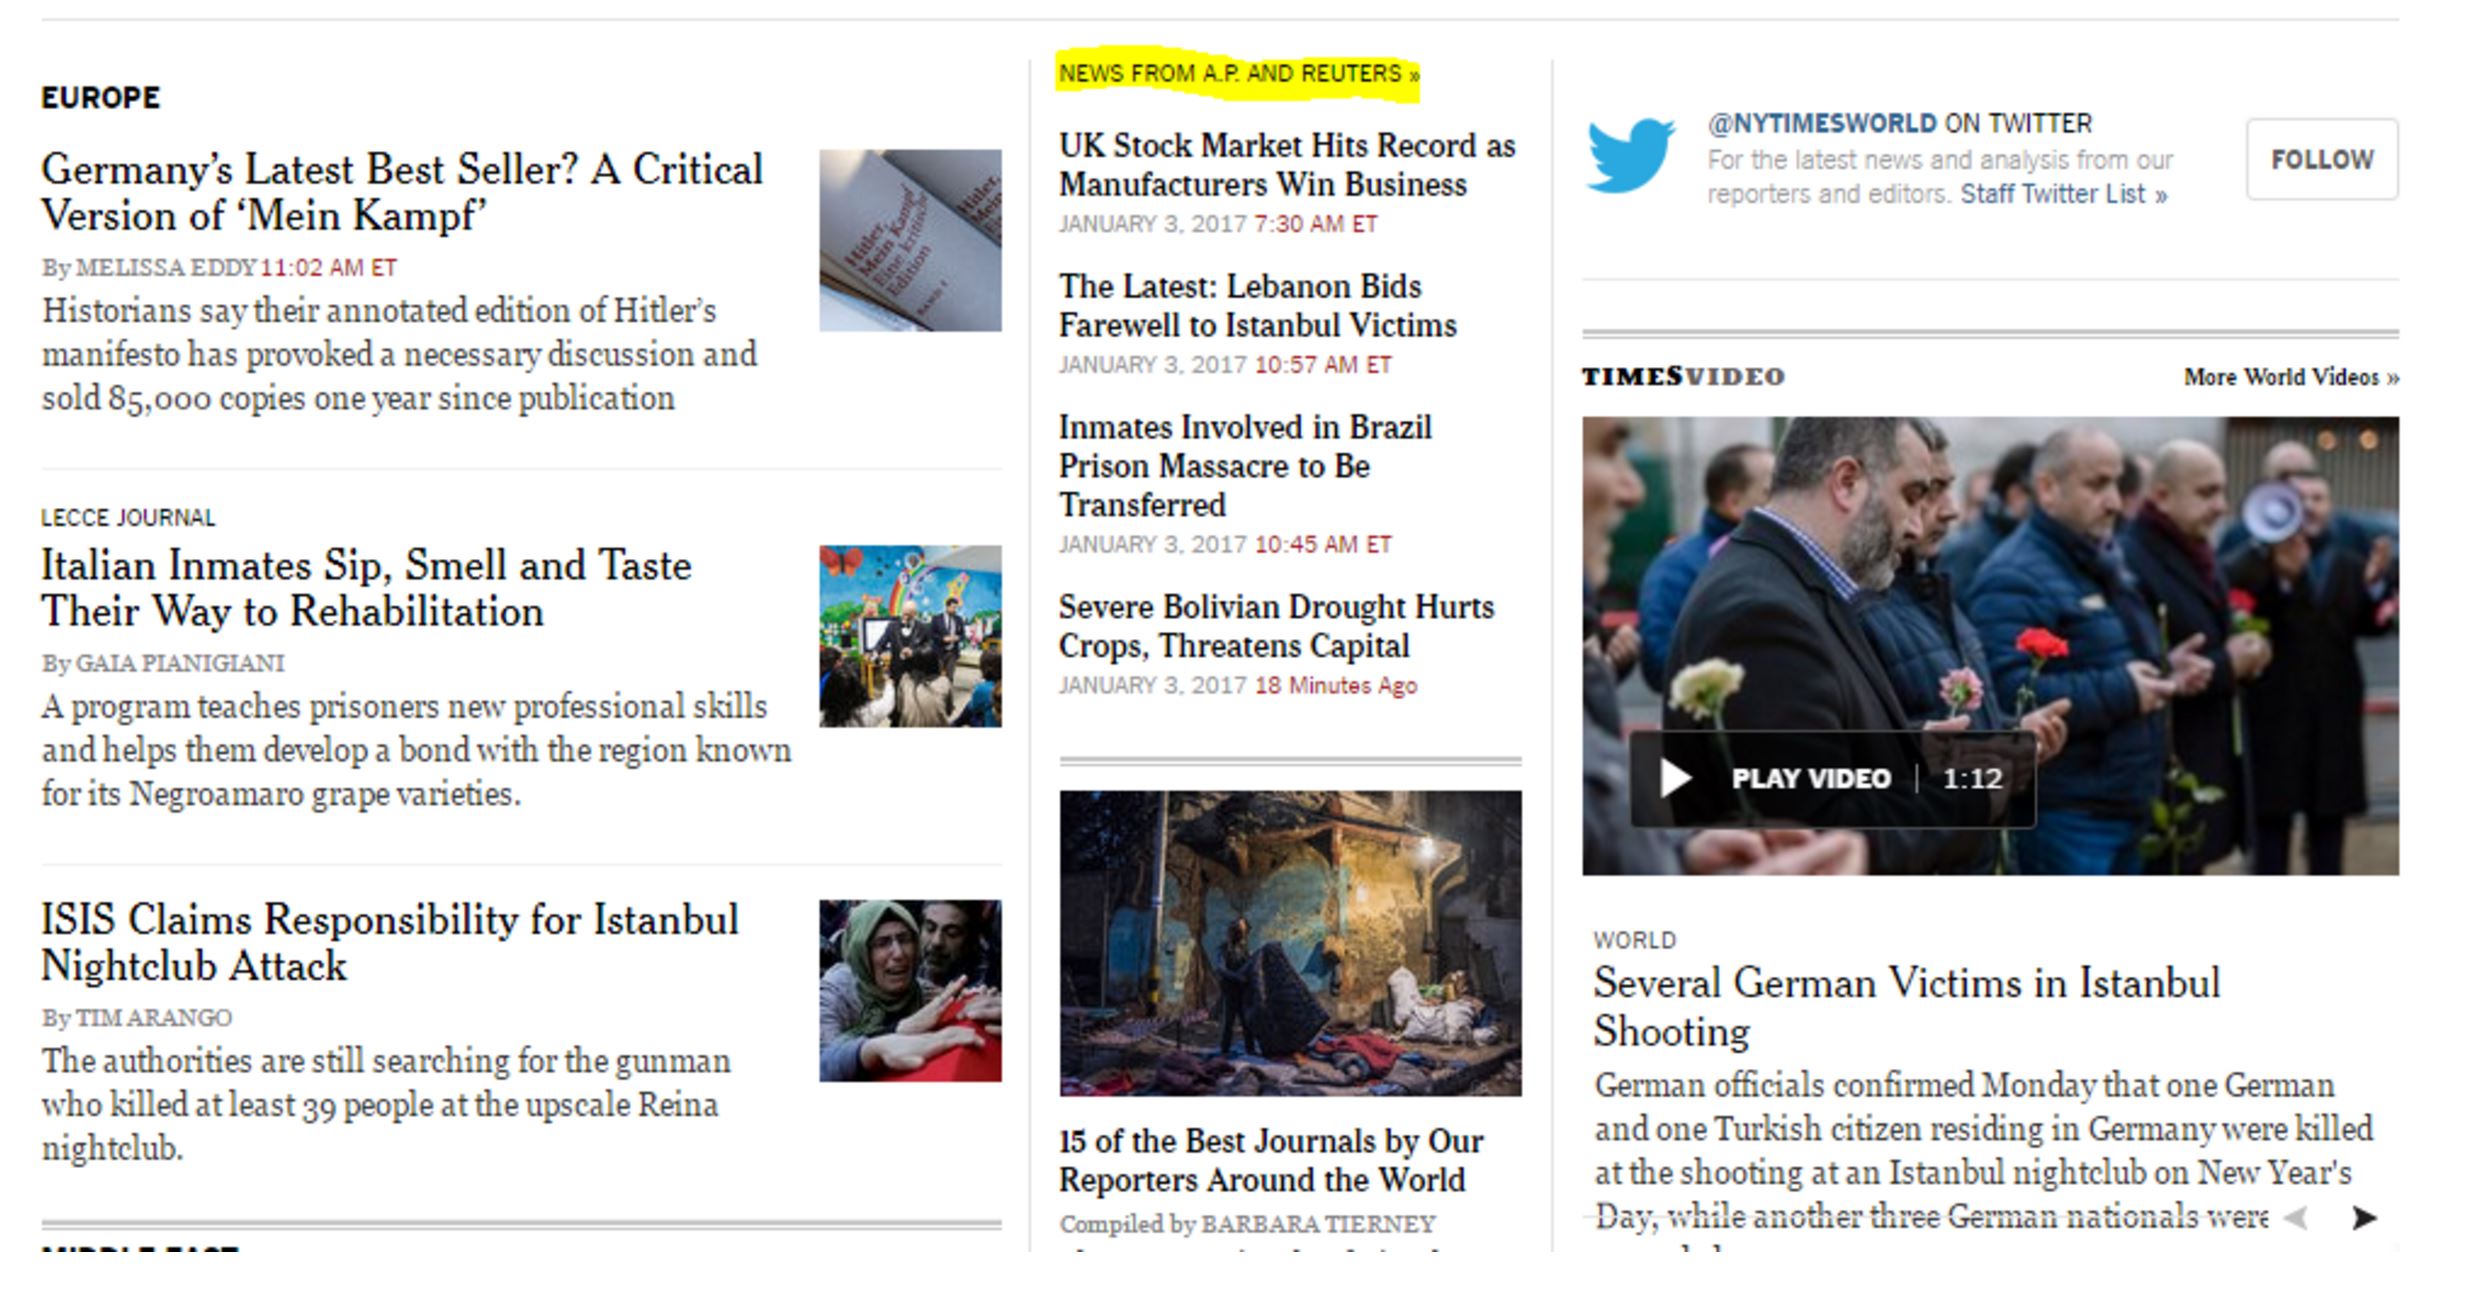 A screenshot of a New York Times webpage with many items on it. In the middle column of items, small text reading “News from AP and Reuters” tops the column.